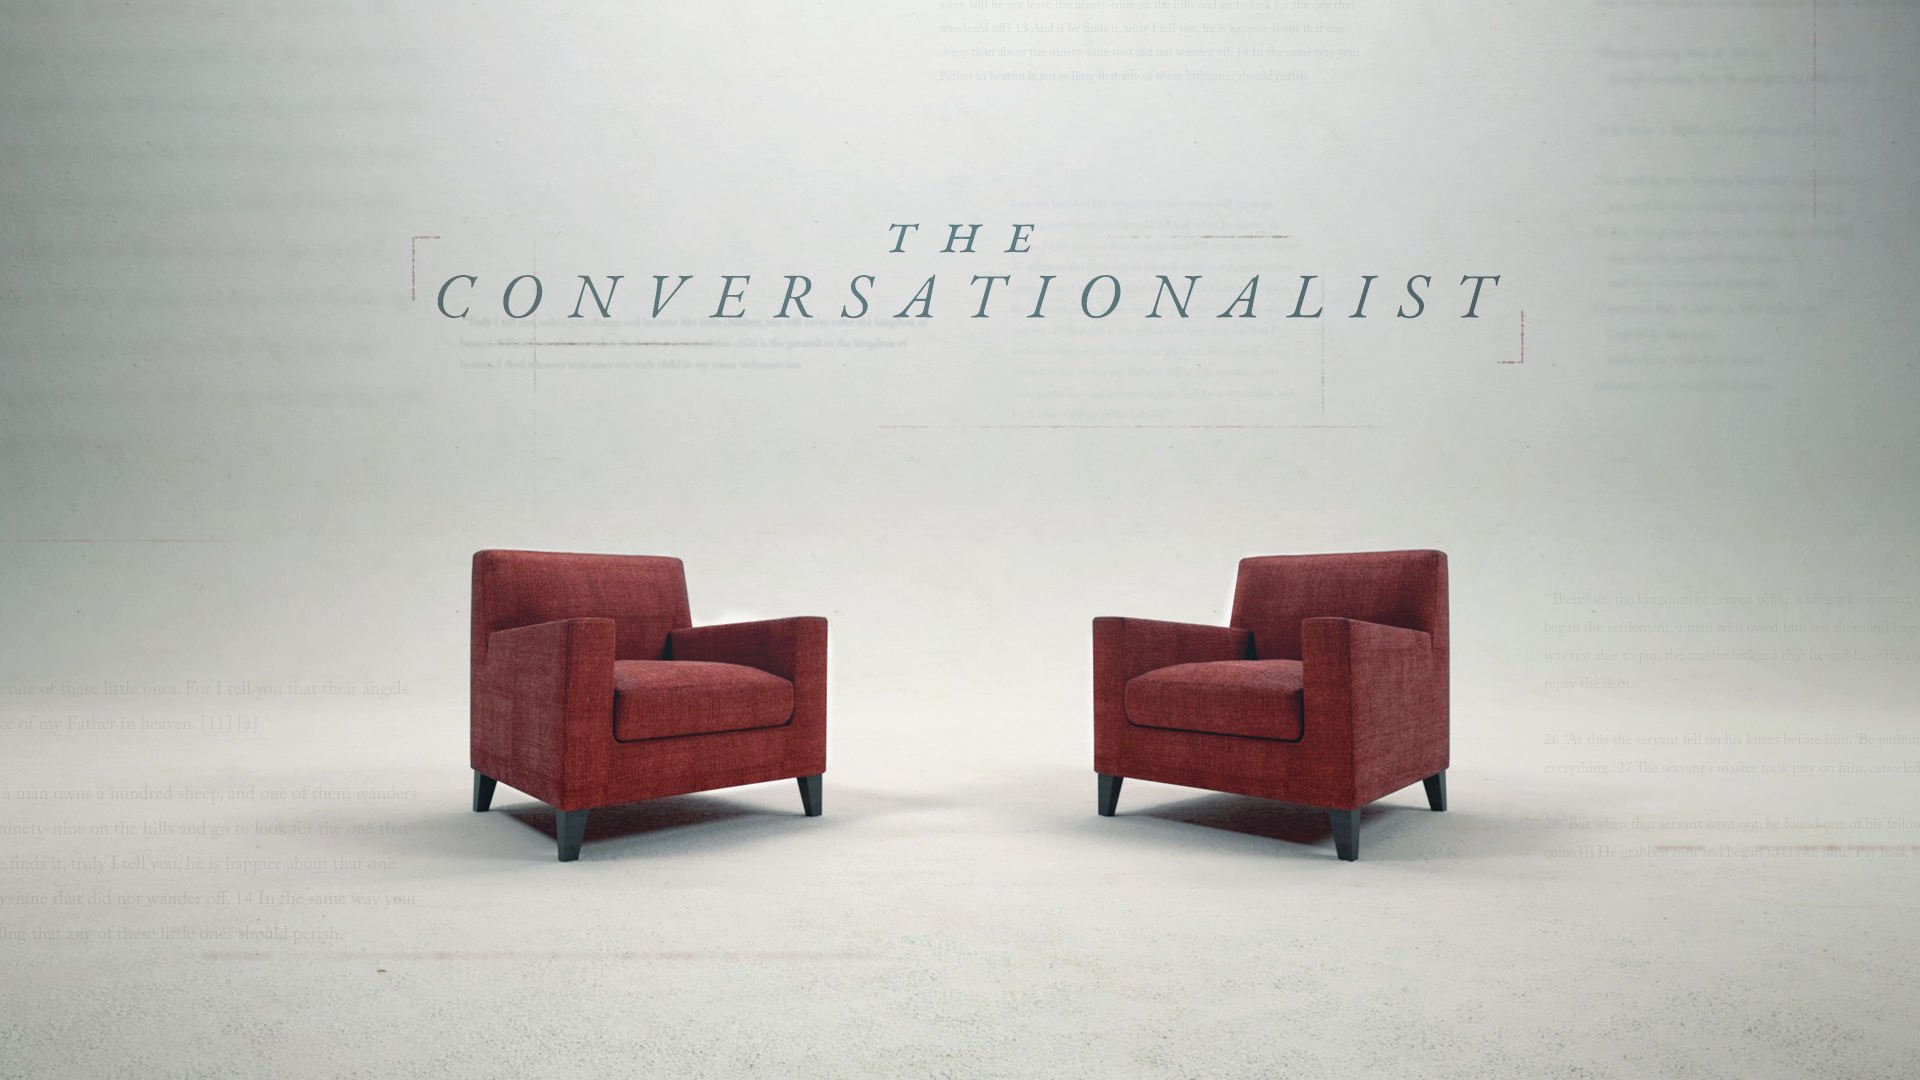 The Conversationalist: Learning to Speak